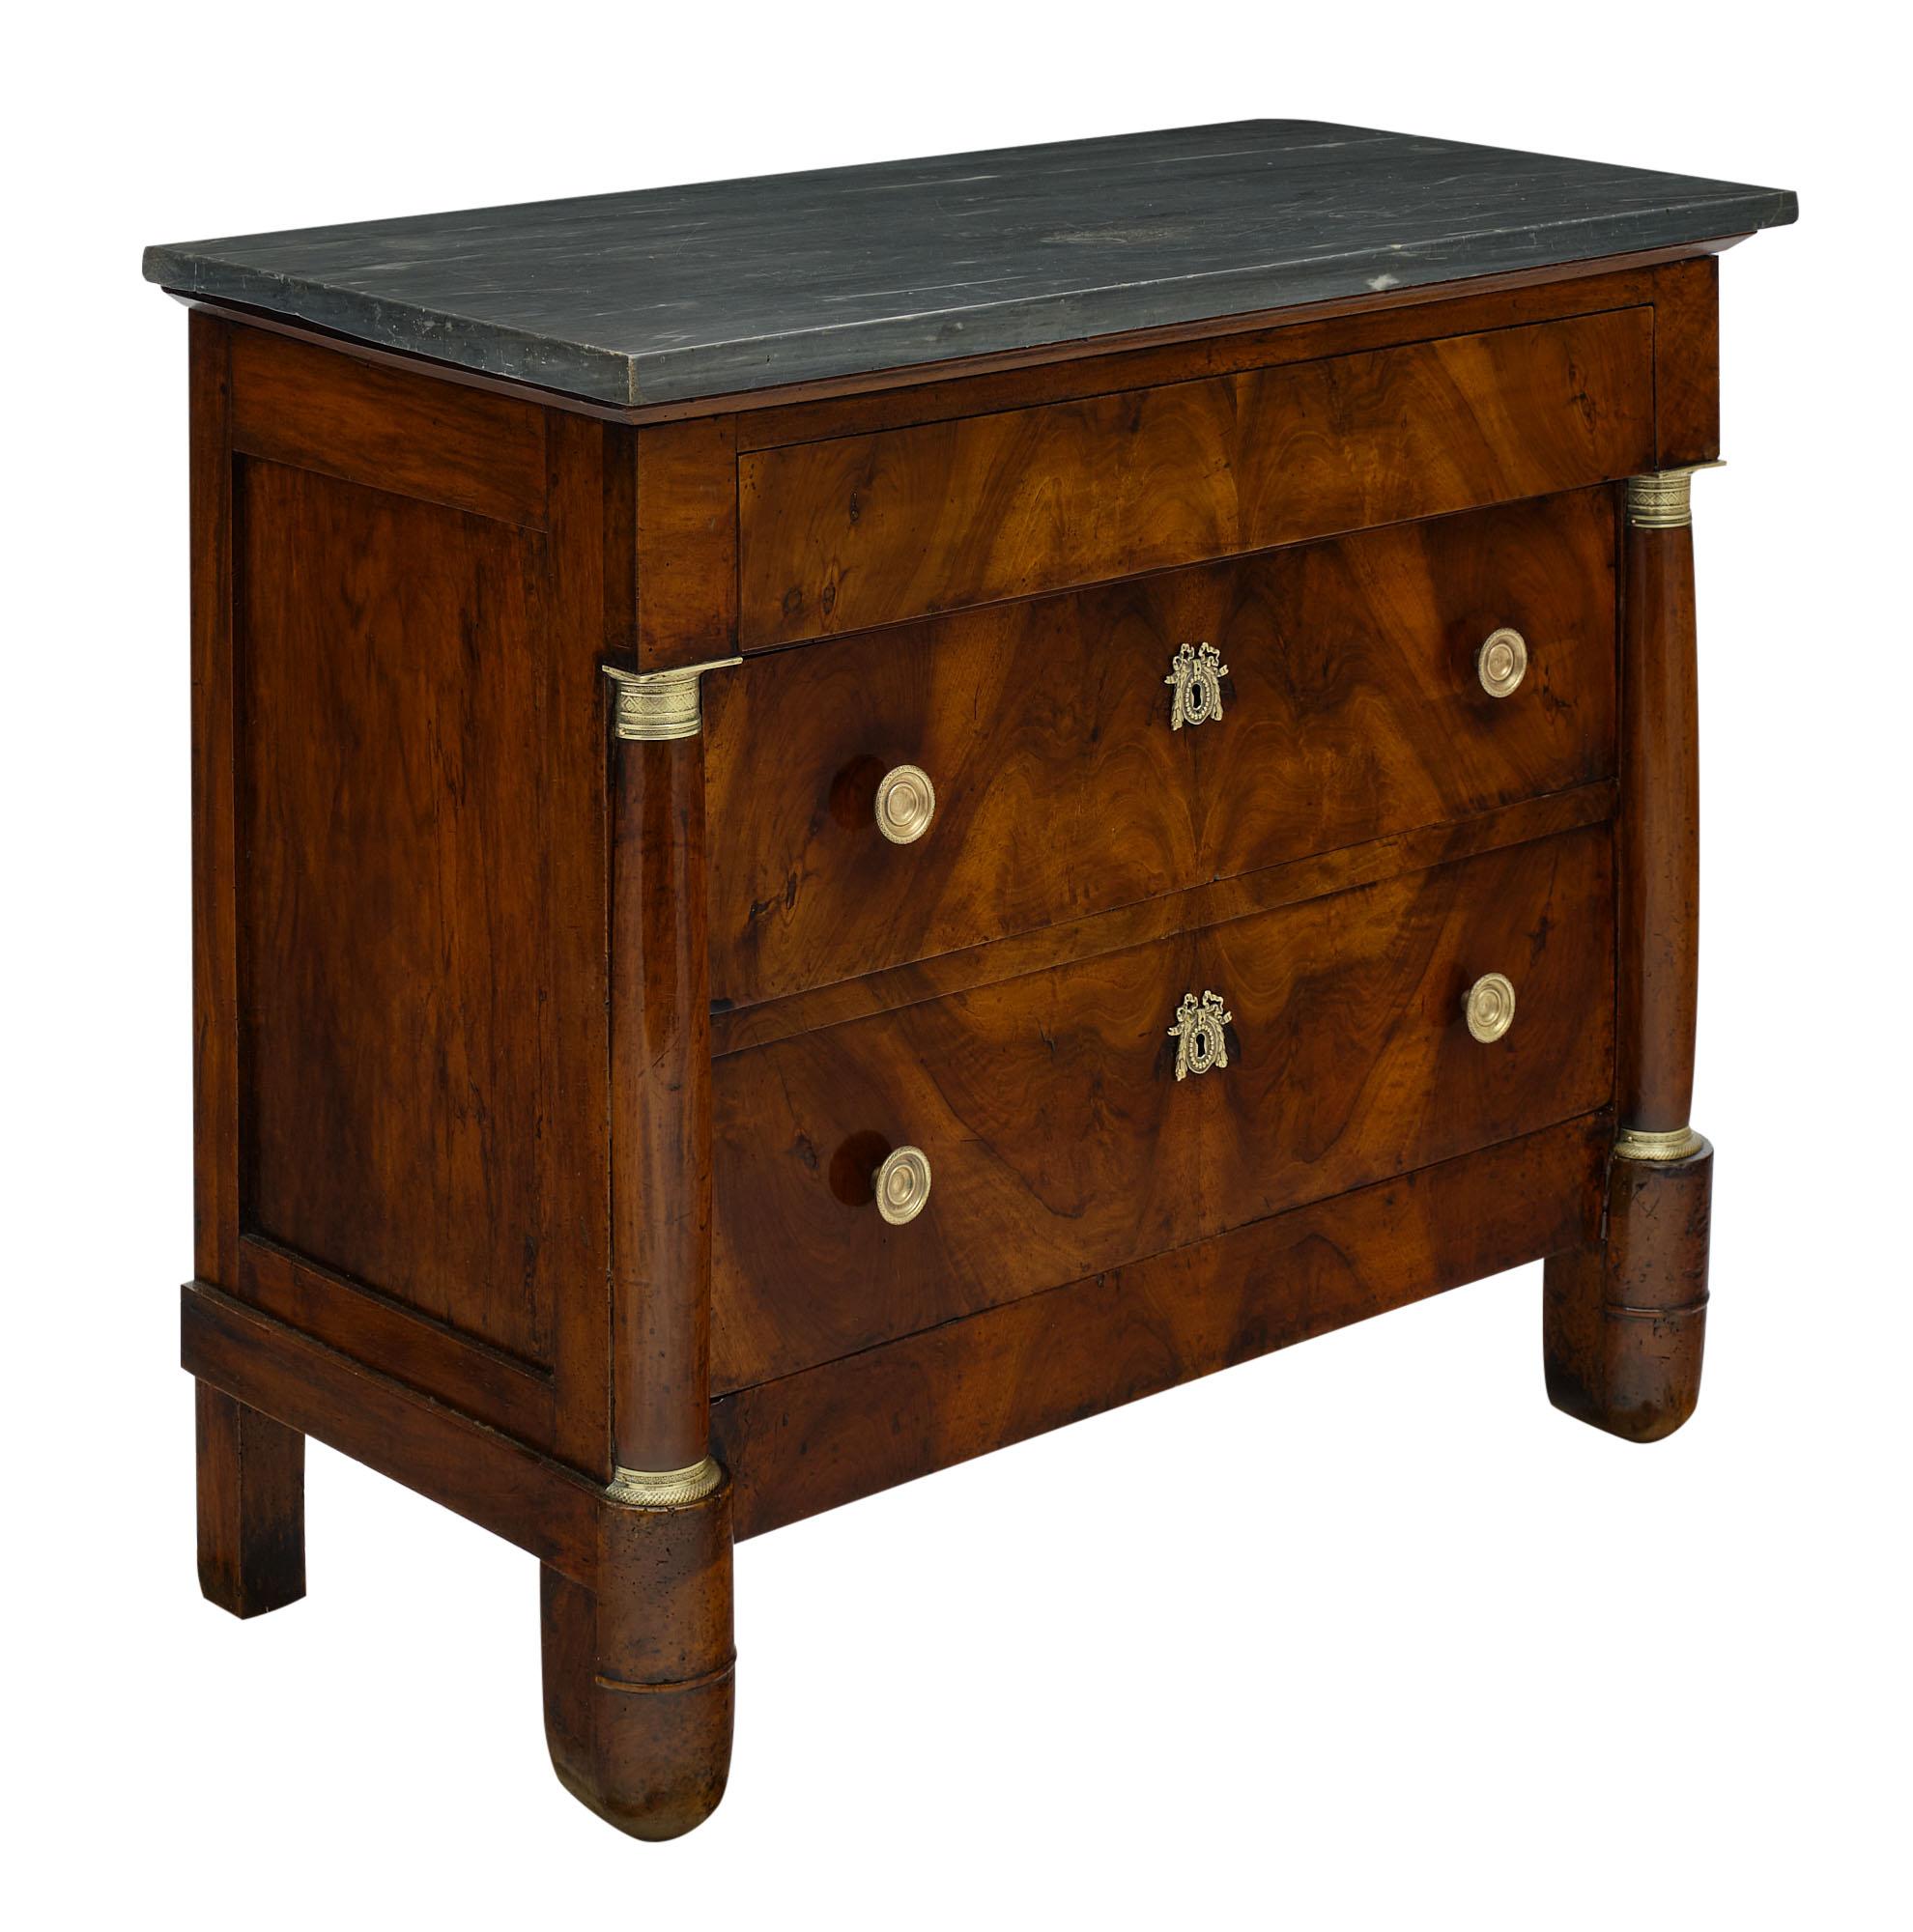 Chest of drawers from the French Empire Period made of solid walnut and burled; figured walnut. There are three dovetailed drawers with finely cast hardware and an intact gray Turkin marble slab on top.